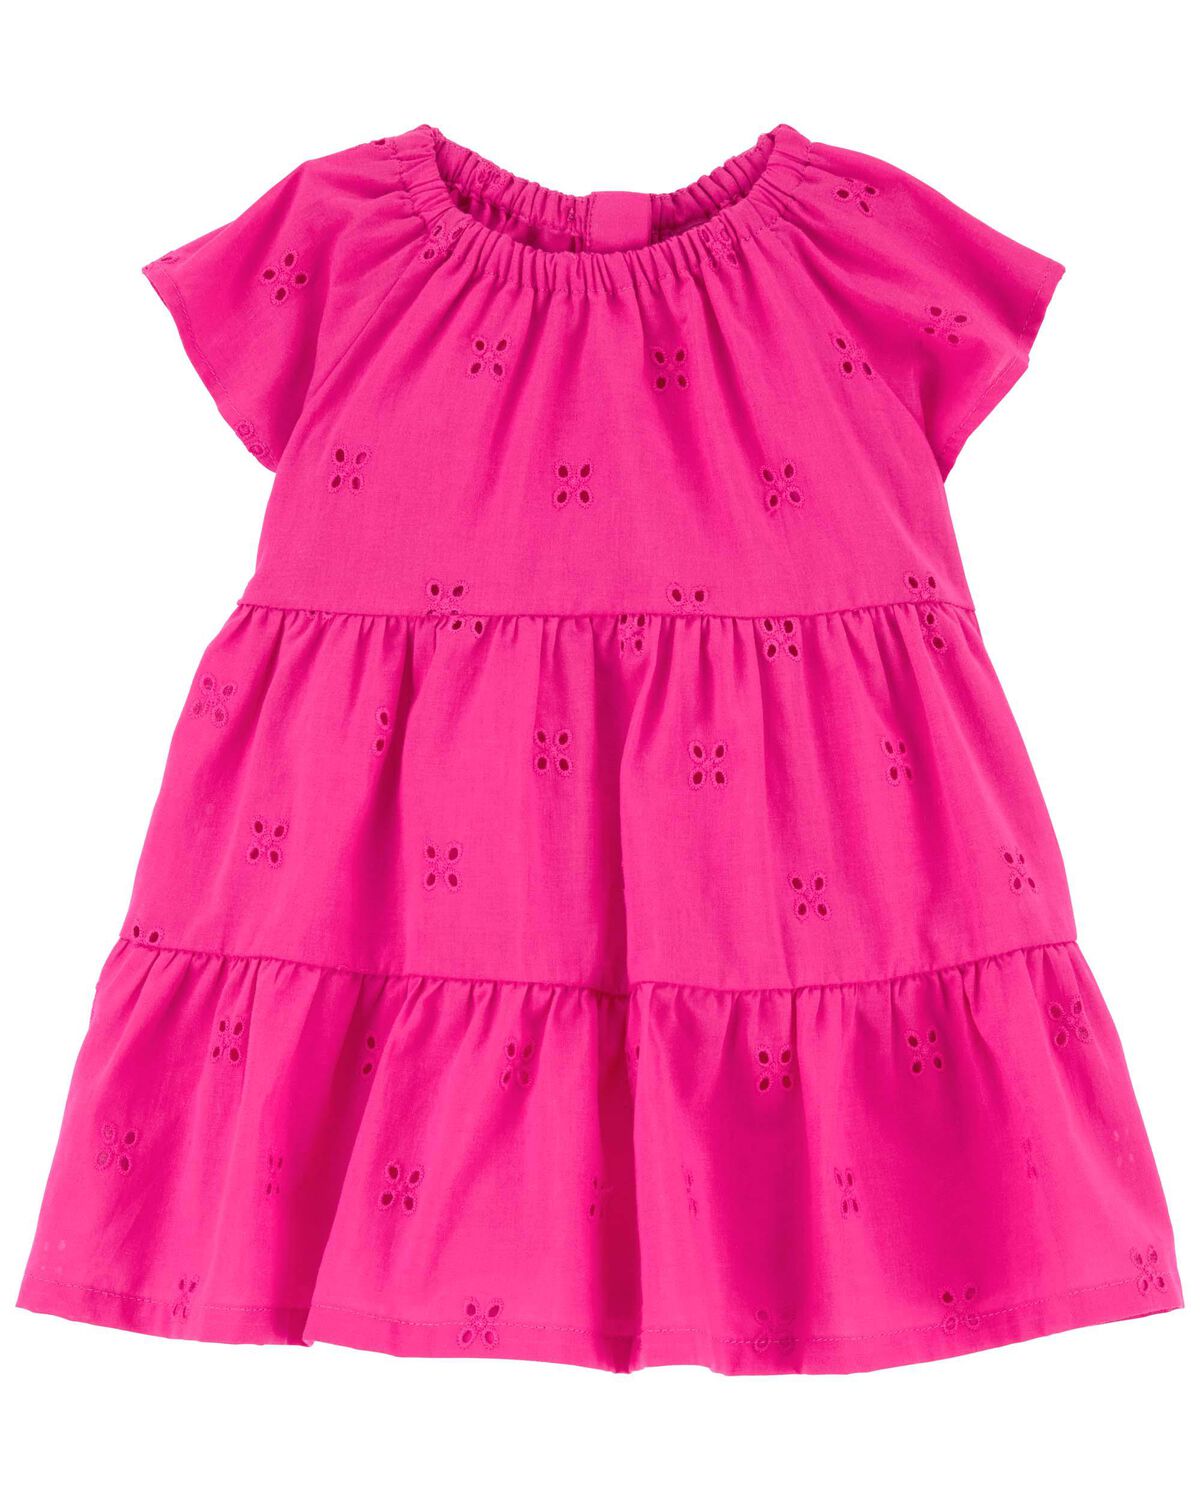 Pink Baby Eyelet Tiered Dress | carters.com